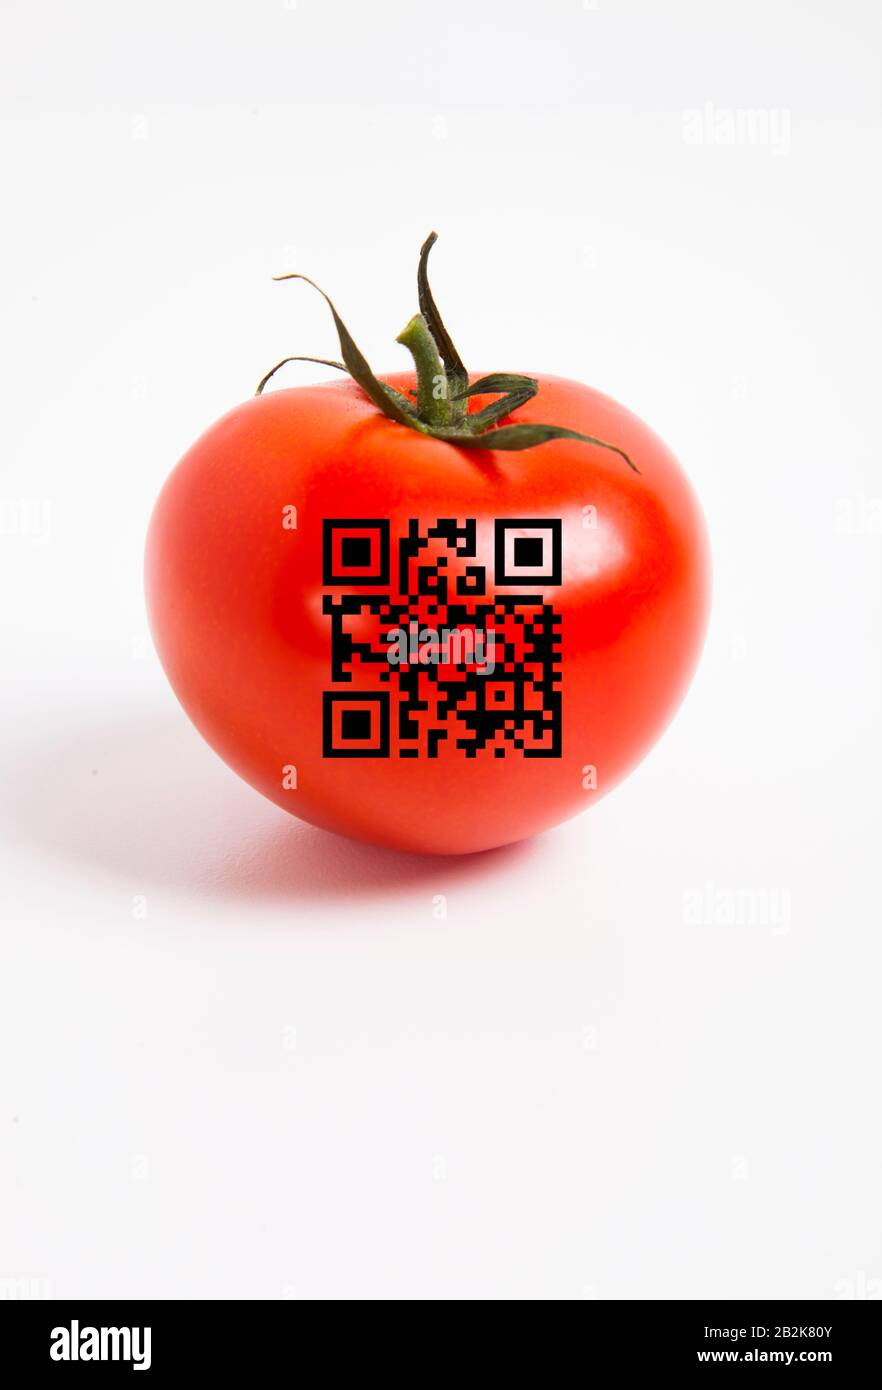 Close-up of tomato with bar code over white background Stock Photo